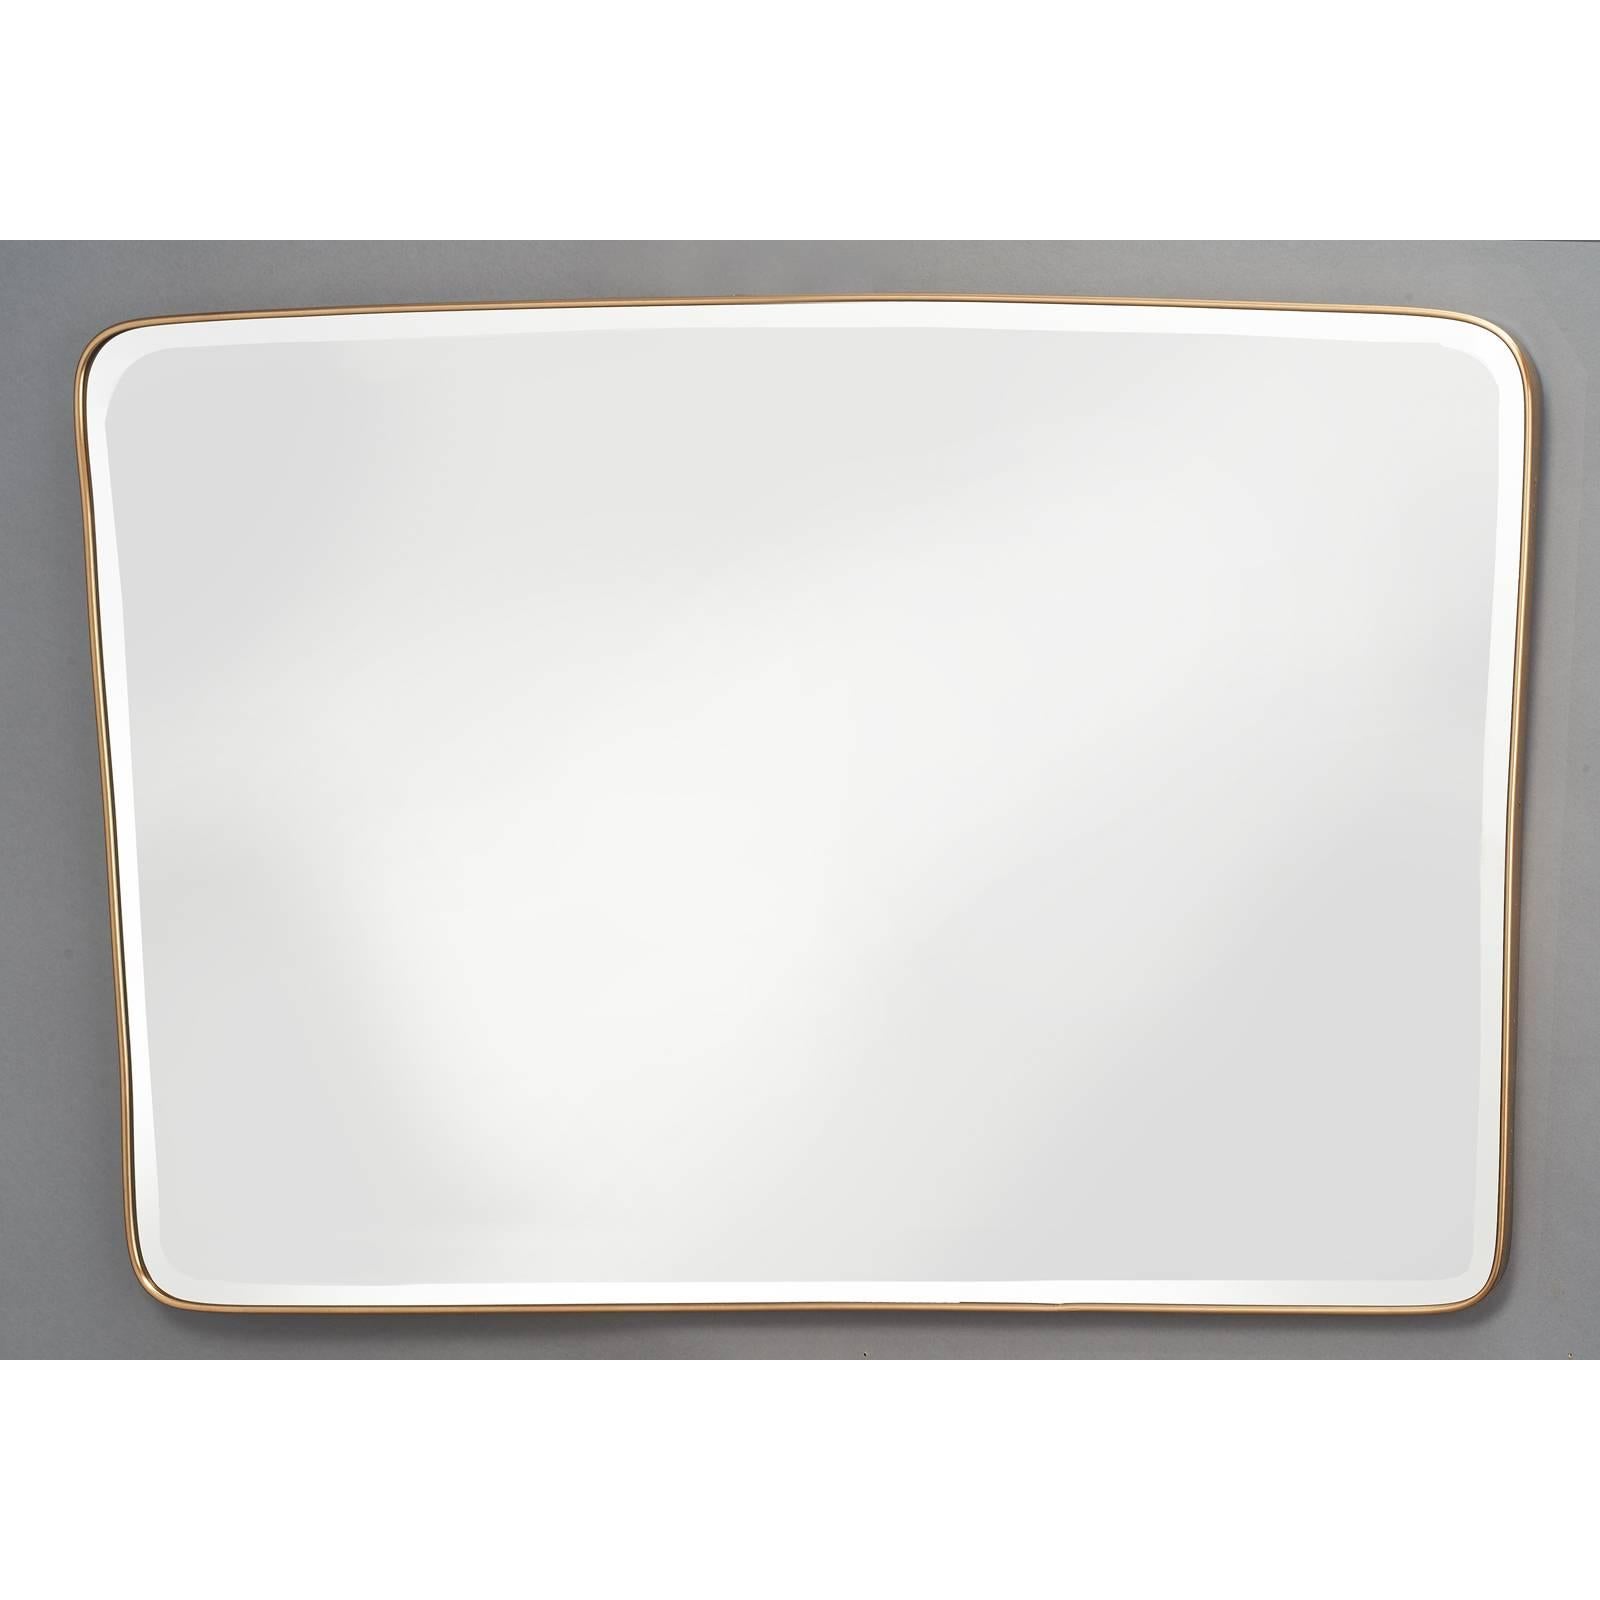 Italy, 1950s.
Large tapered and shaped horizontal brass mirror with rounded corners.
Bevelled glass.

Measures: 46 W x 31 H.